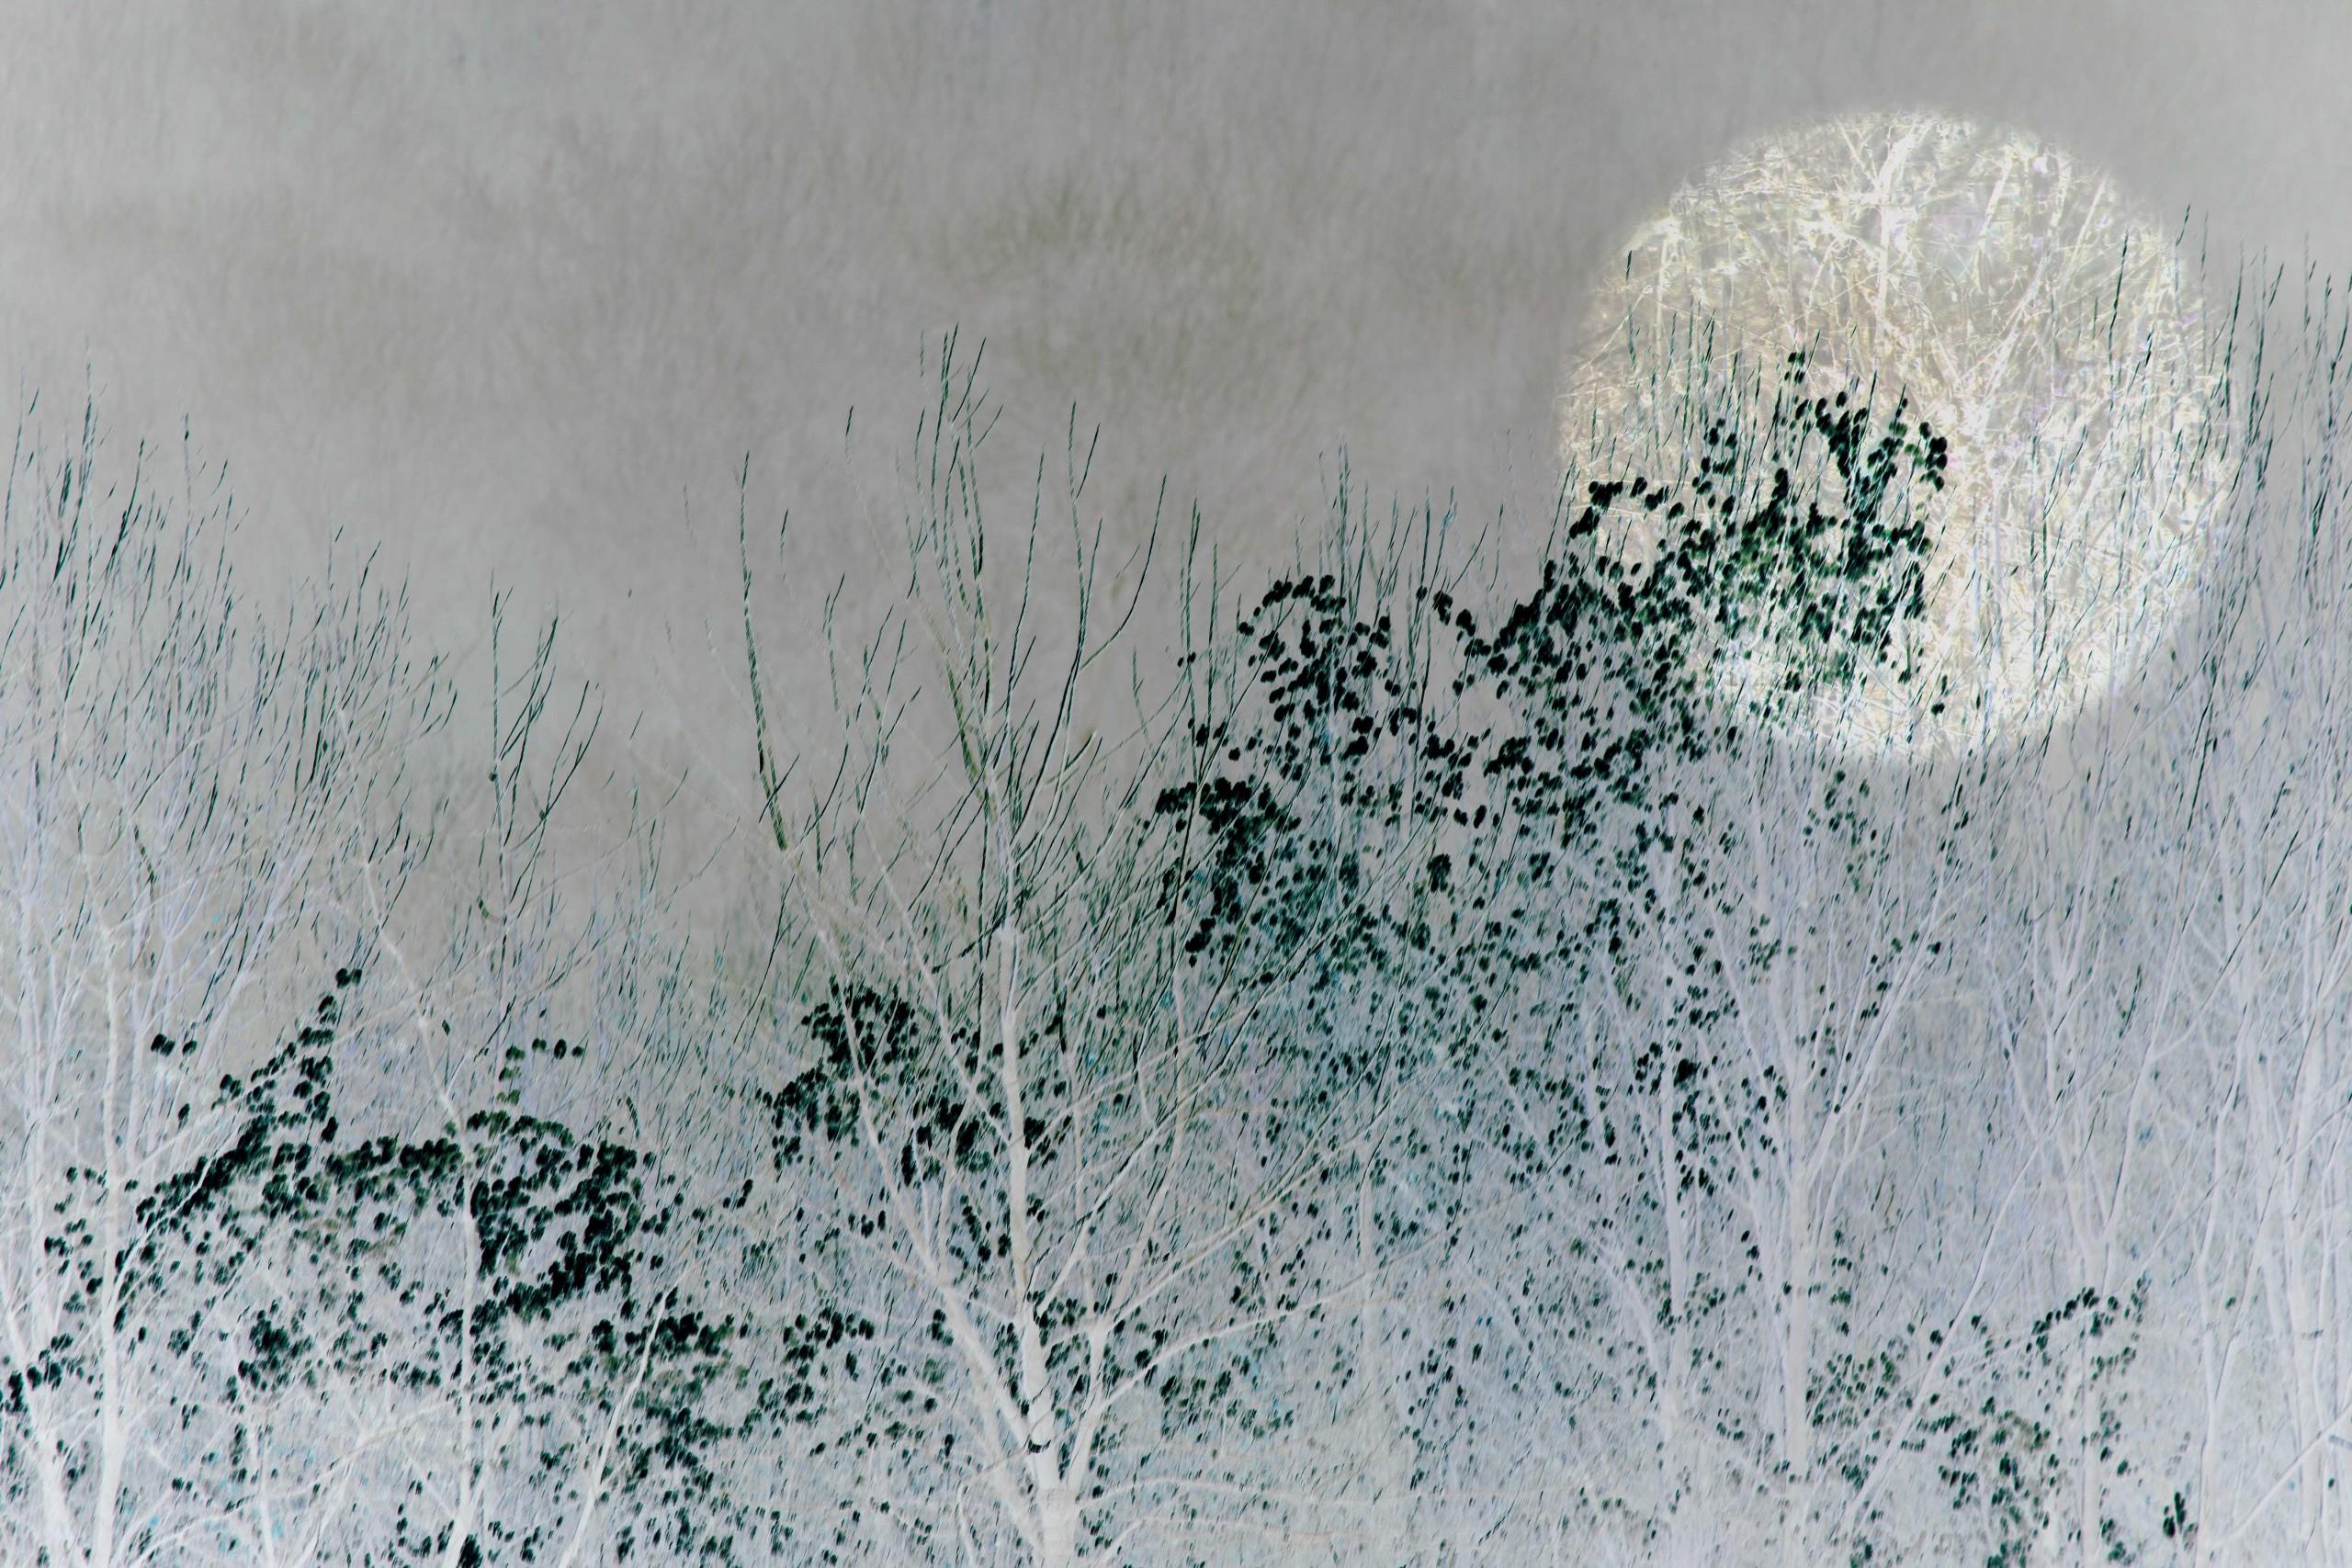 Winter moon 2, 3 and 4 - Realist Print by Sarah Brooks